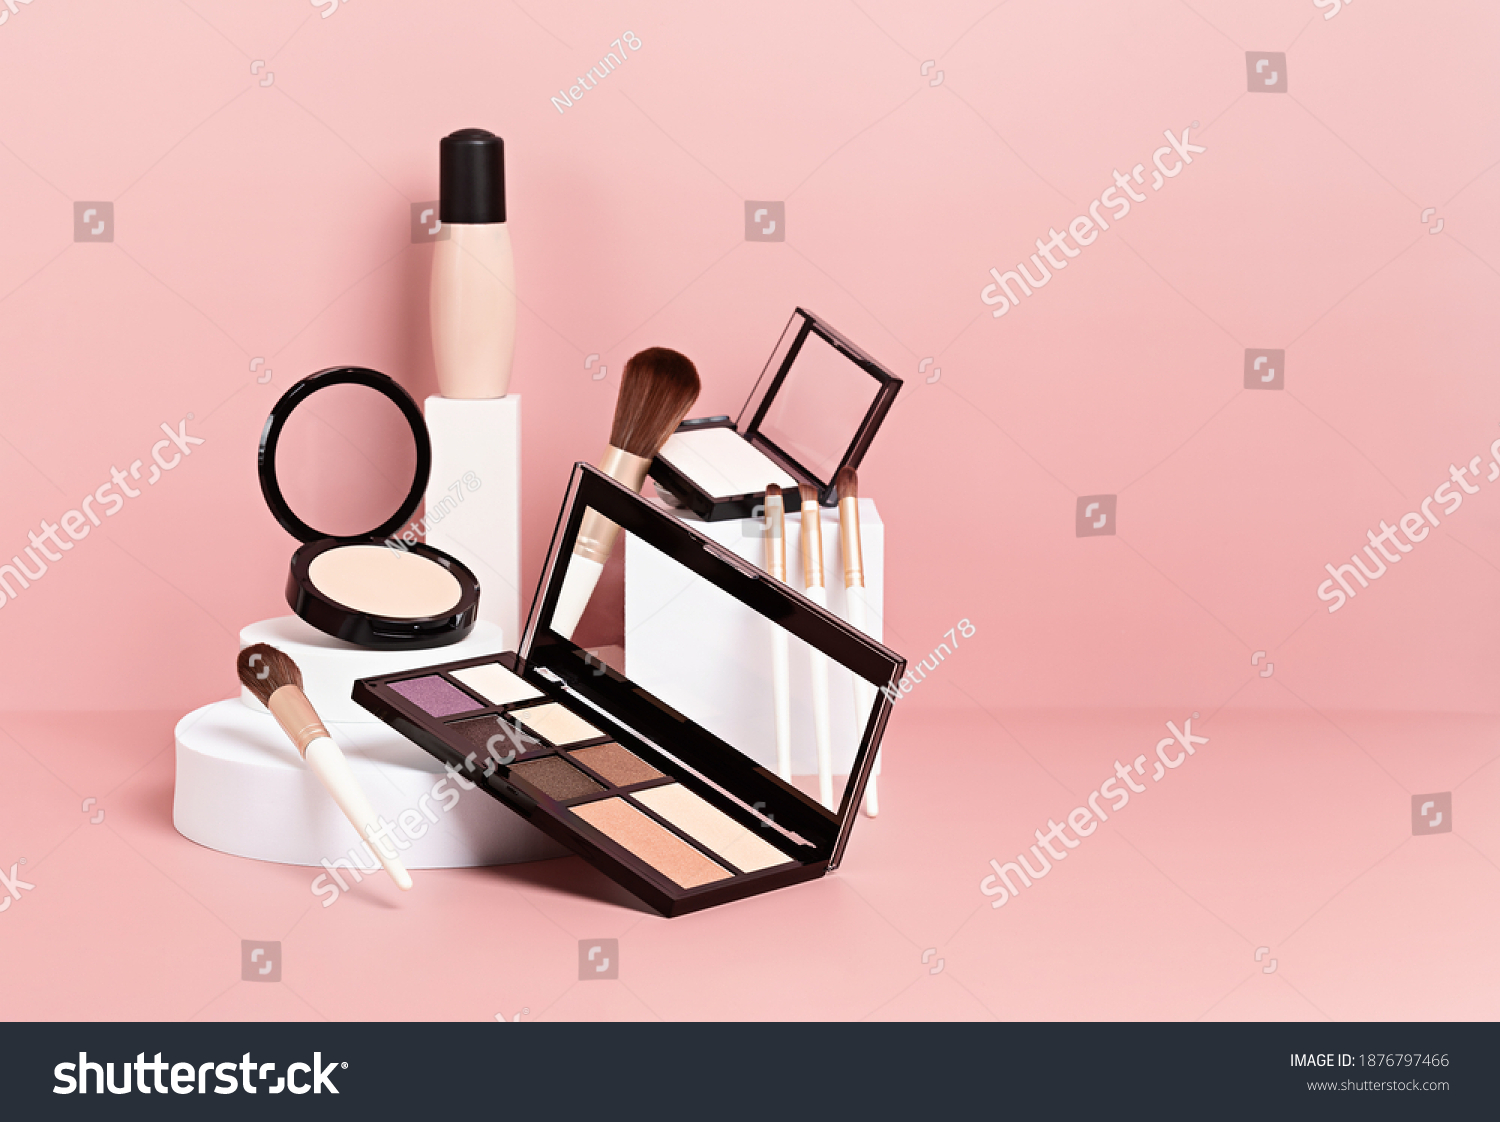 Make up products prsented on white podiums on pink pastel background. Mockup for branding and packaging presentation  #1876797466